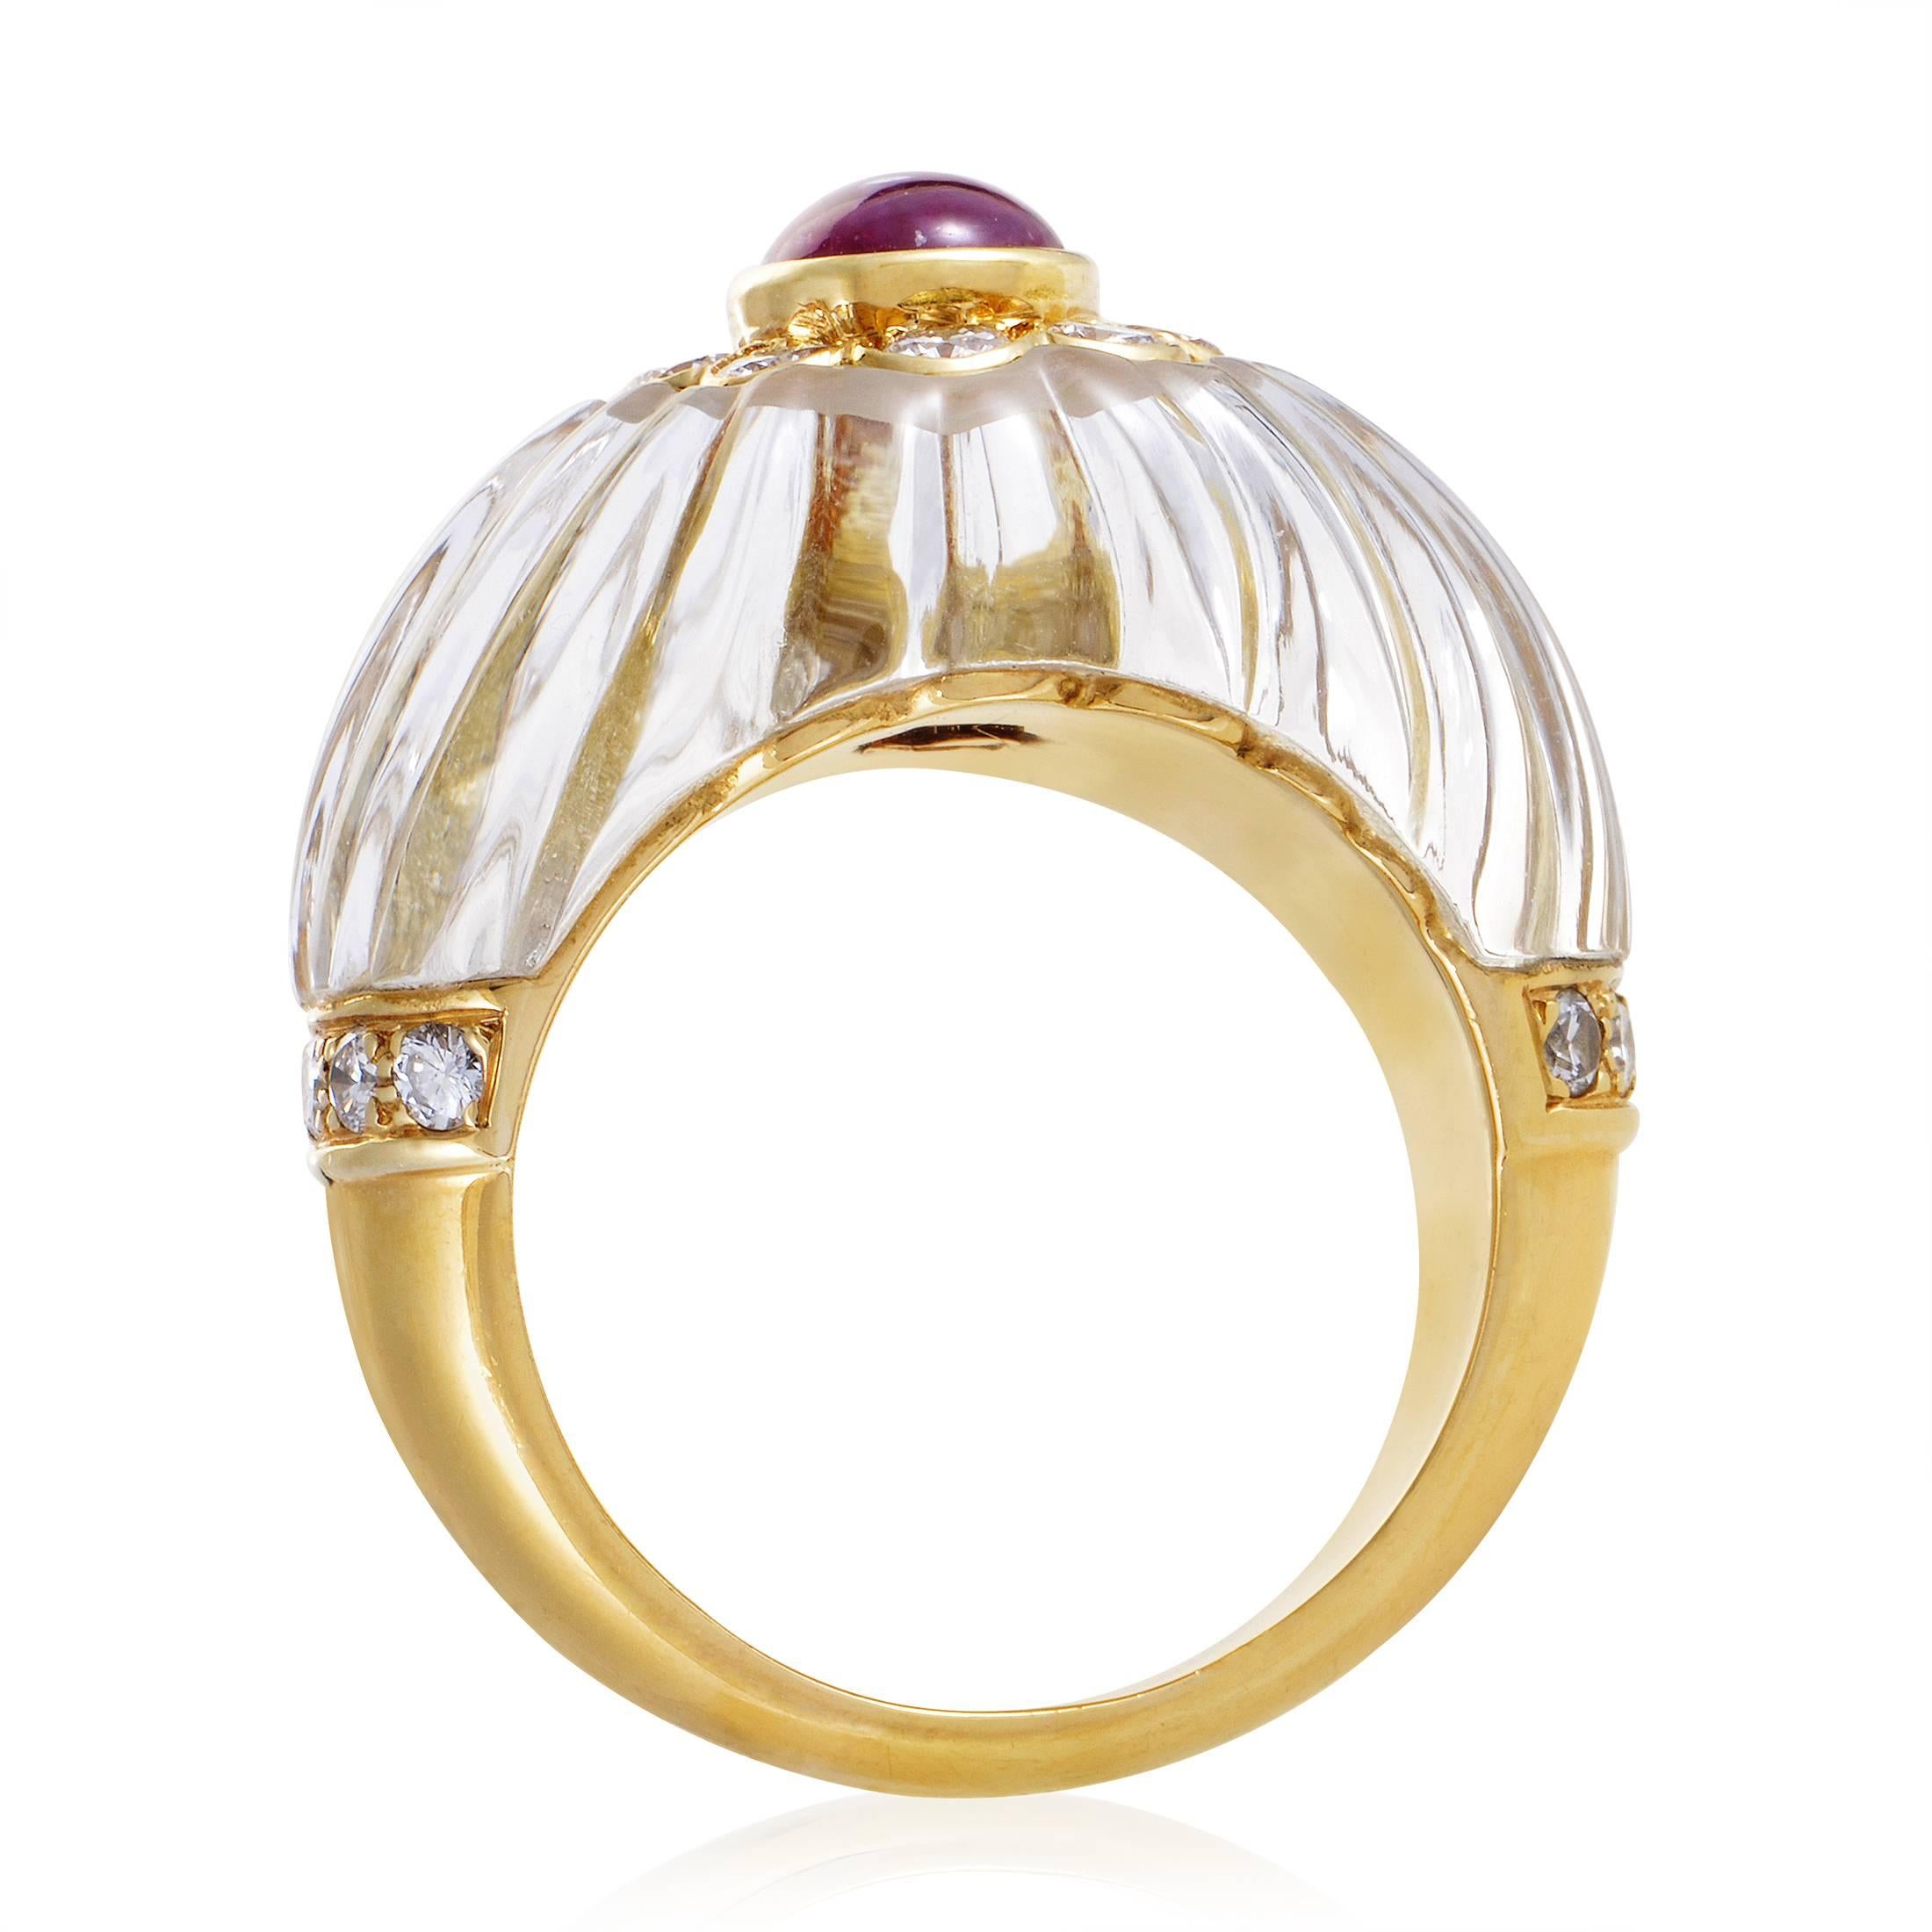 The mesmerizing crystal sets the stage perfectly for the 0.75ct of precious diamonds to shine and for the gorgeous ruby weighing approximately 1.50 carats to exude its stunning allure in this fascinating 18K yellow gold ring from Boucheron.
Ring